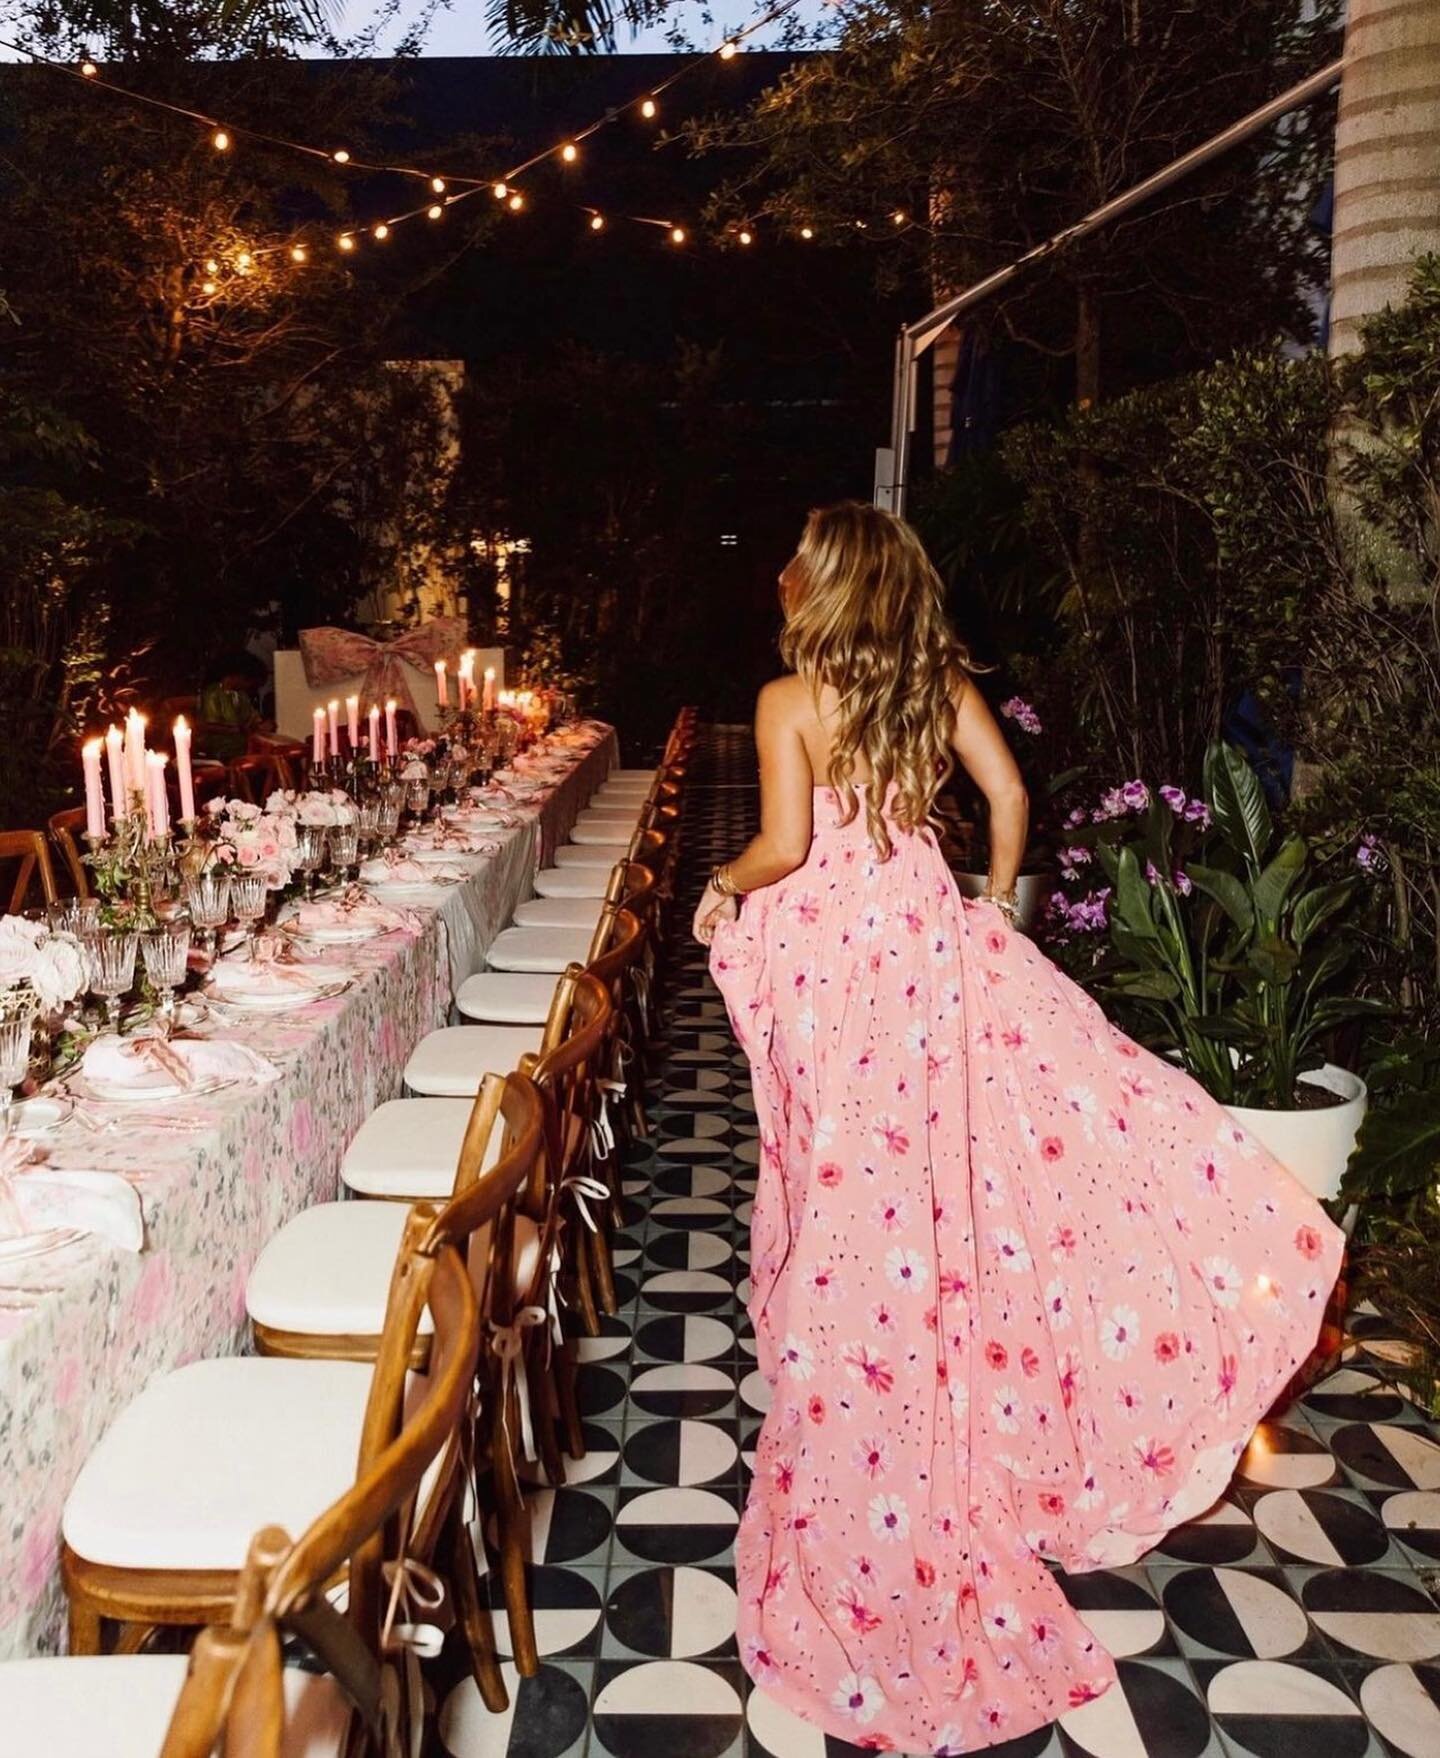 no one does pink like @loveshackfancy 💘
february forever being the month of luuuv 

shop some love shack in our stores @fshualalai &amp; @fsmaui 

photo from: @loveshackfancy